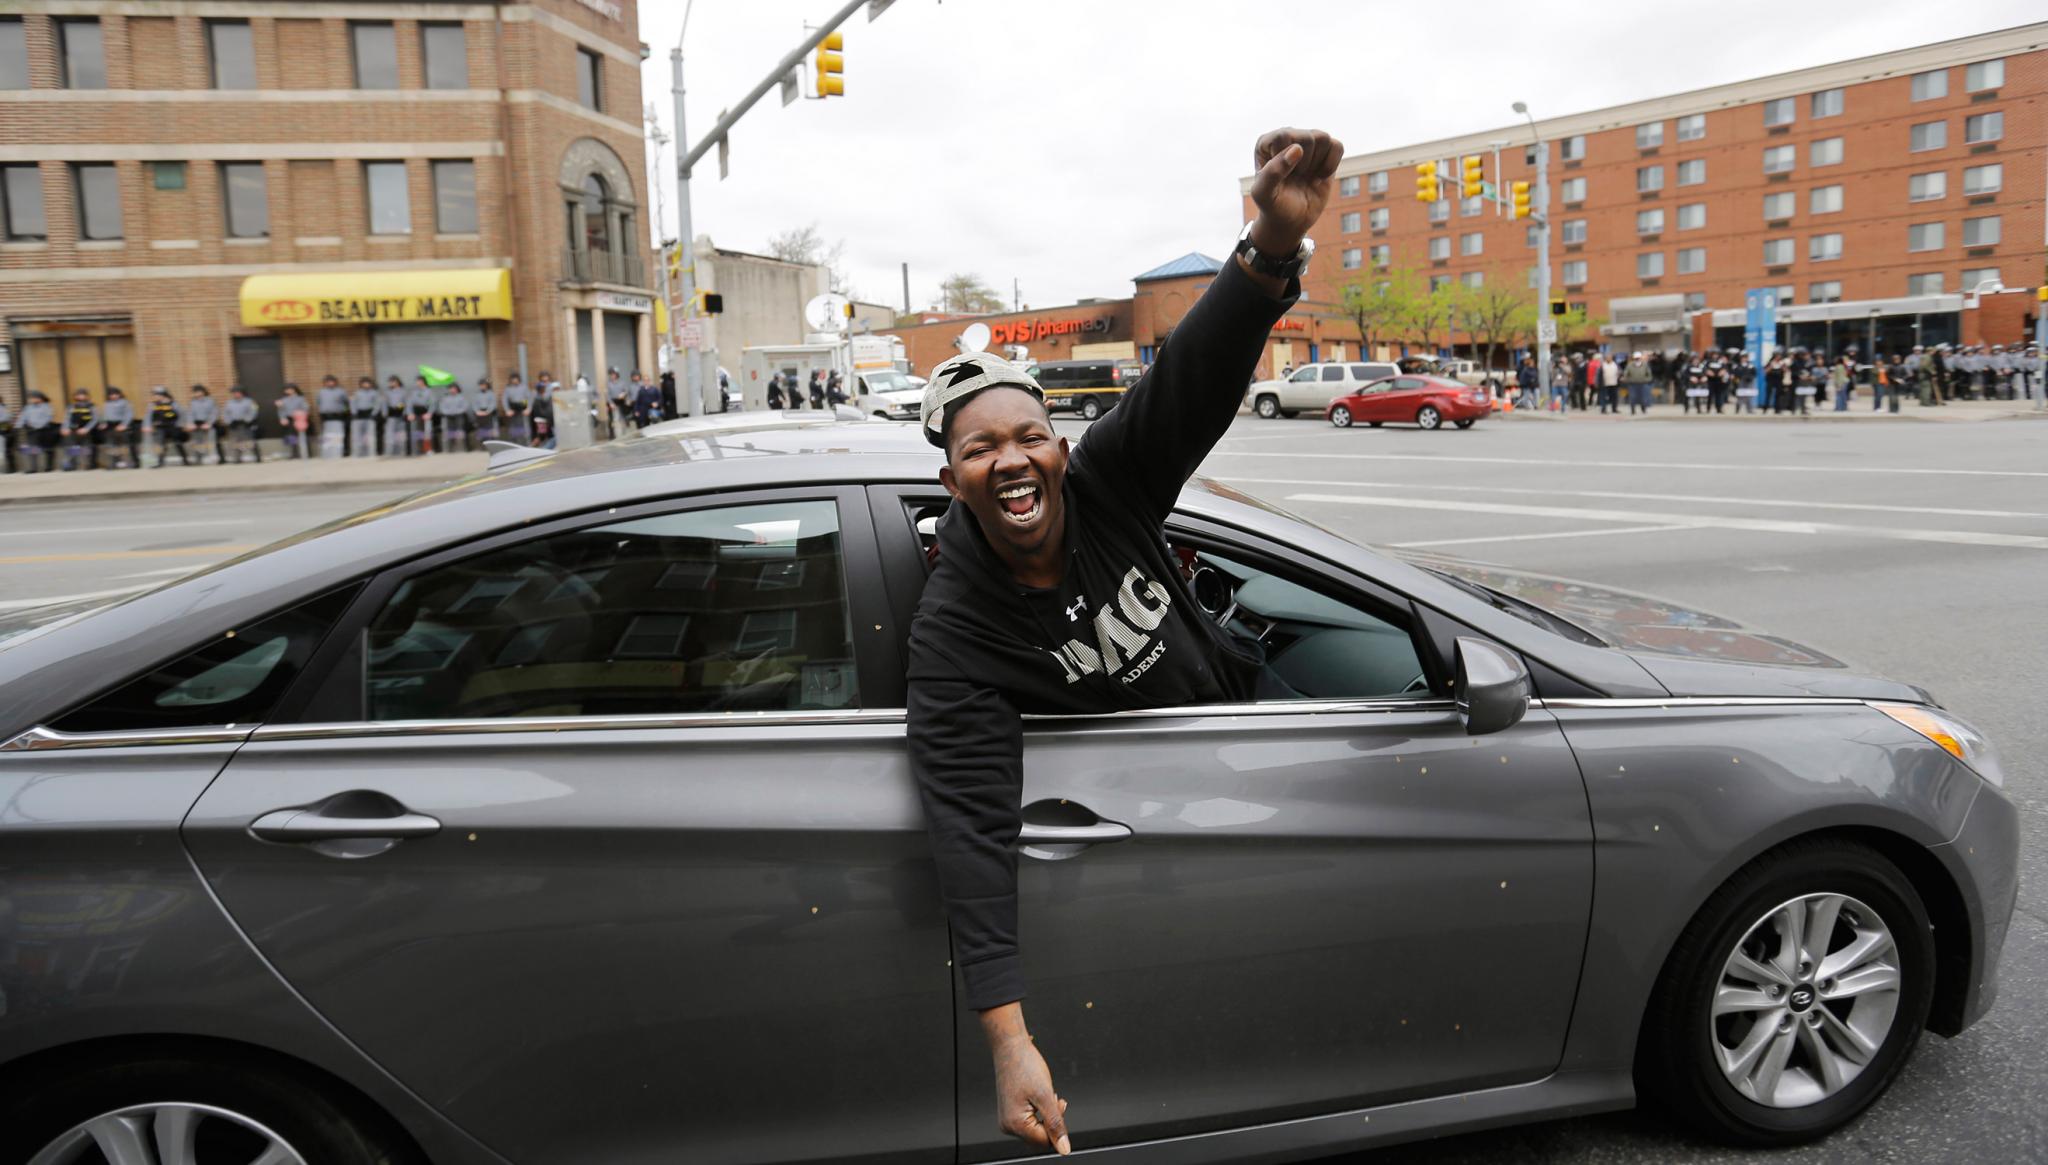 PHOTOS: Baltimore Social Unrest After Freddie Gray's Death